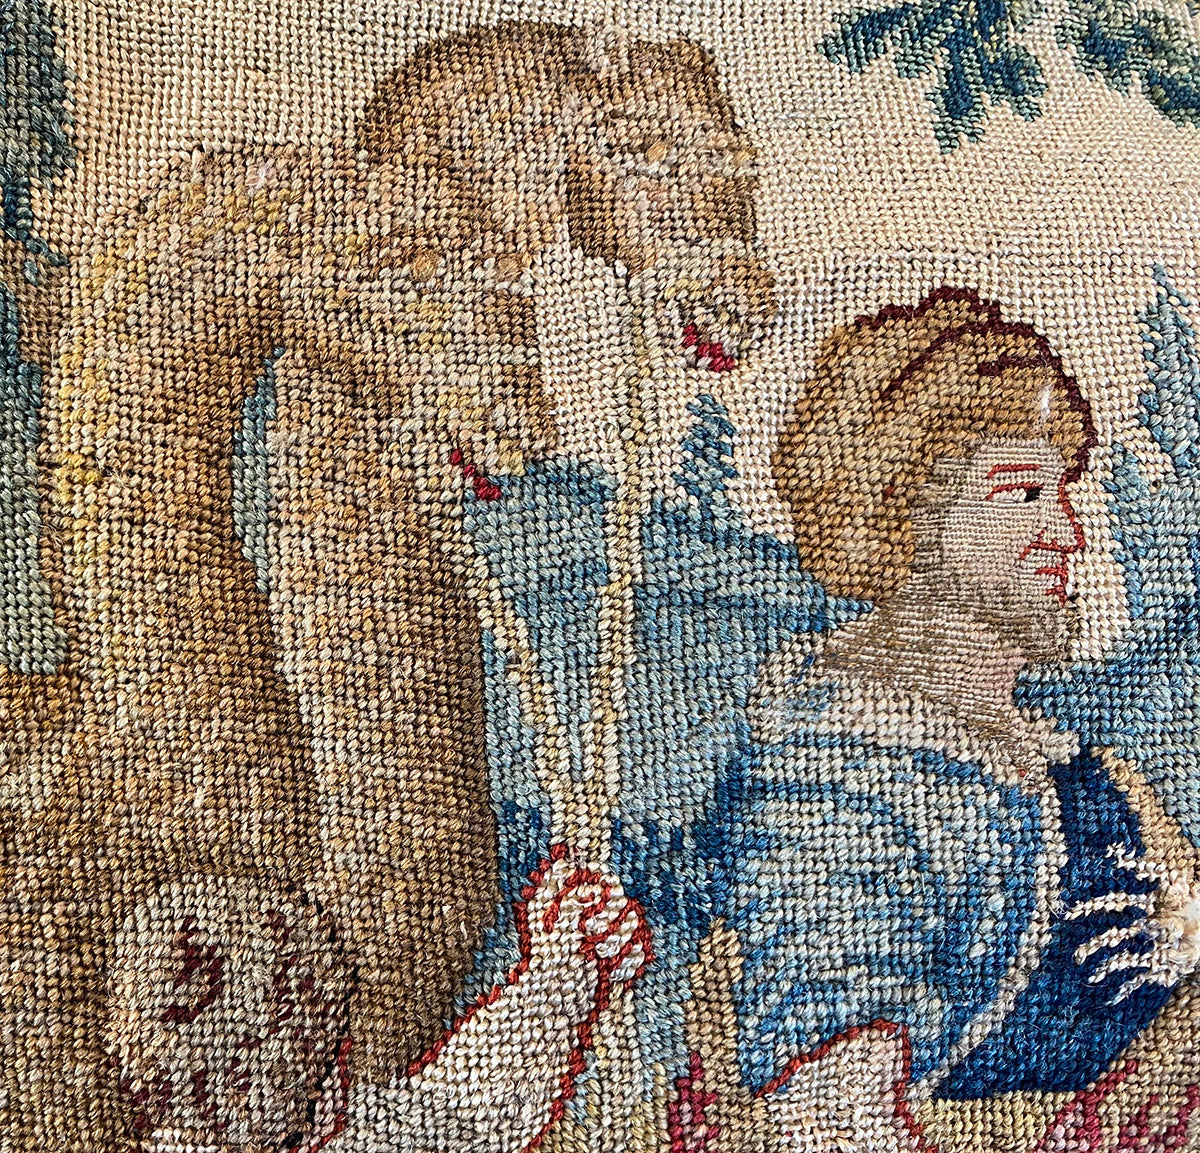 RARE 74" x 27" Antique French Louis XIV Needlework Point de Saint-Cyr Needlework Tapestry, Parrot, Cock, Camels, Figural, Needlepoint Wall Hanging, Pillows?